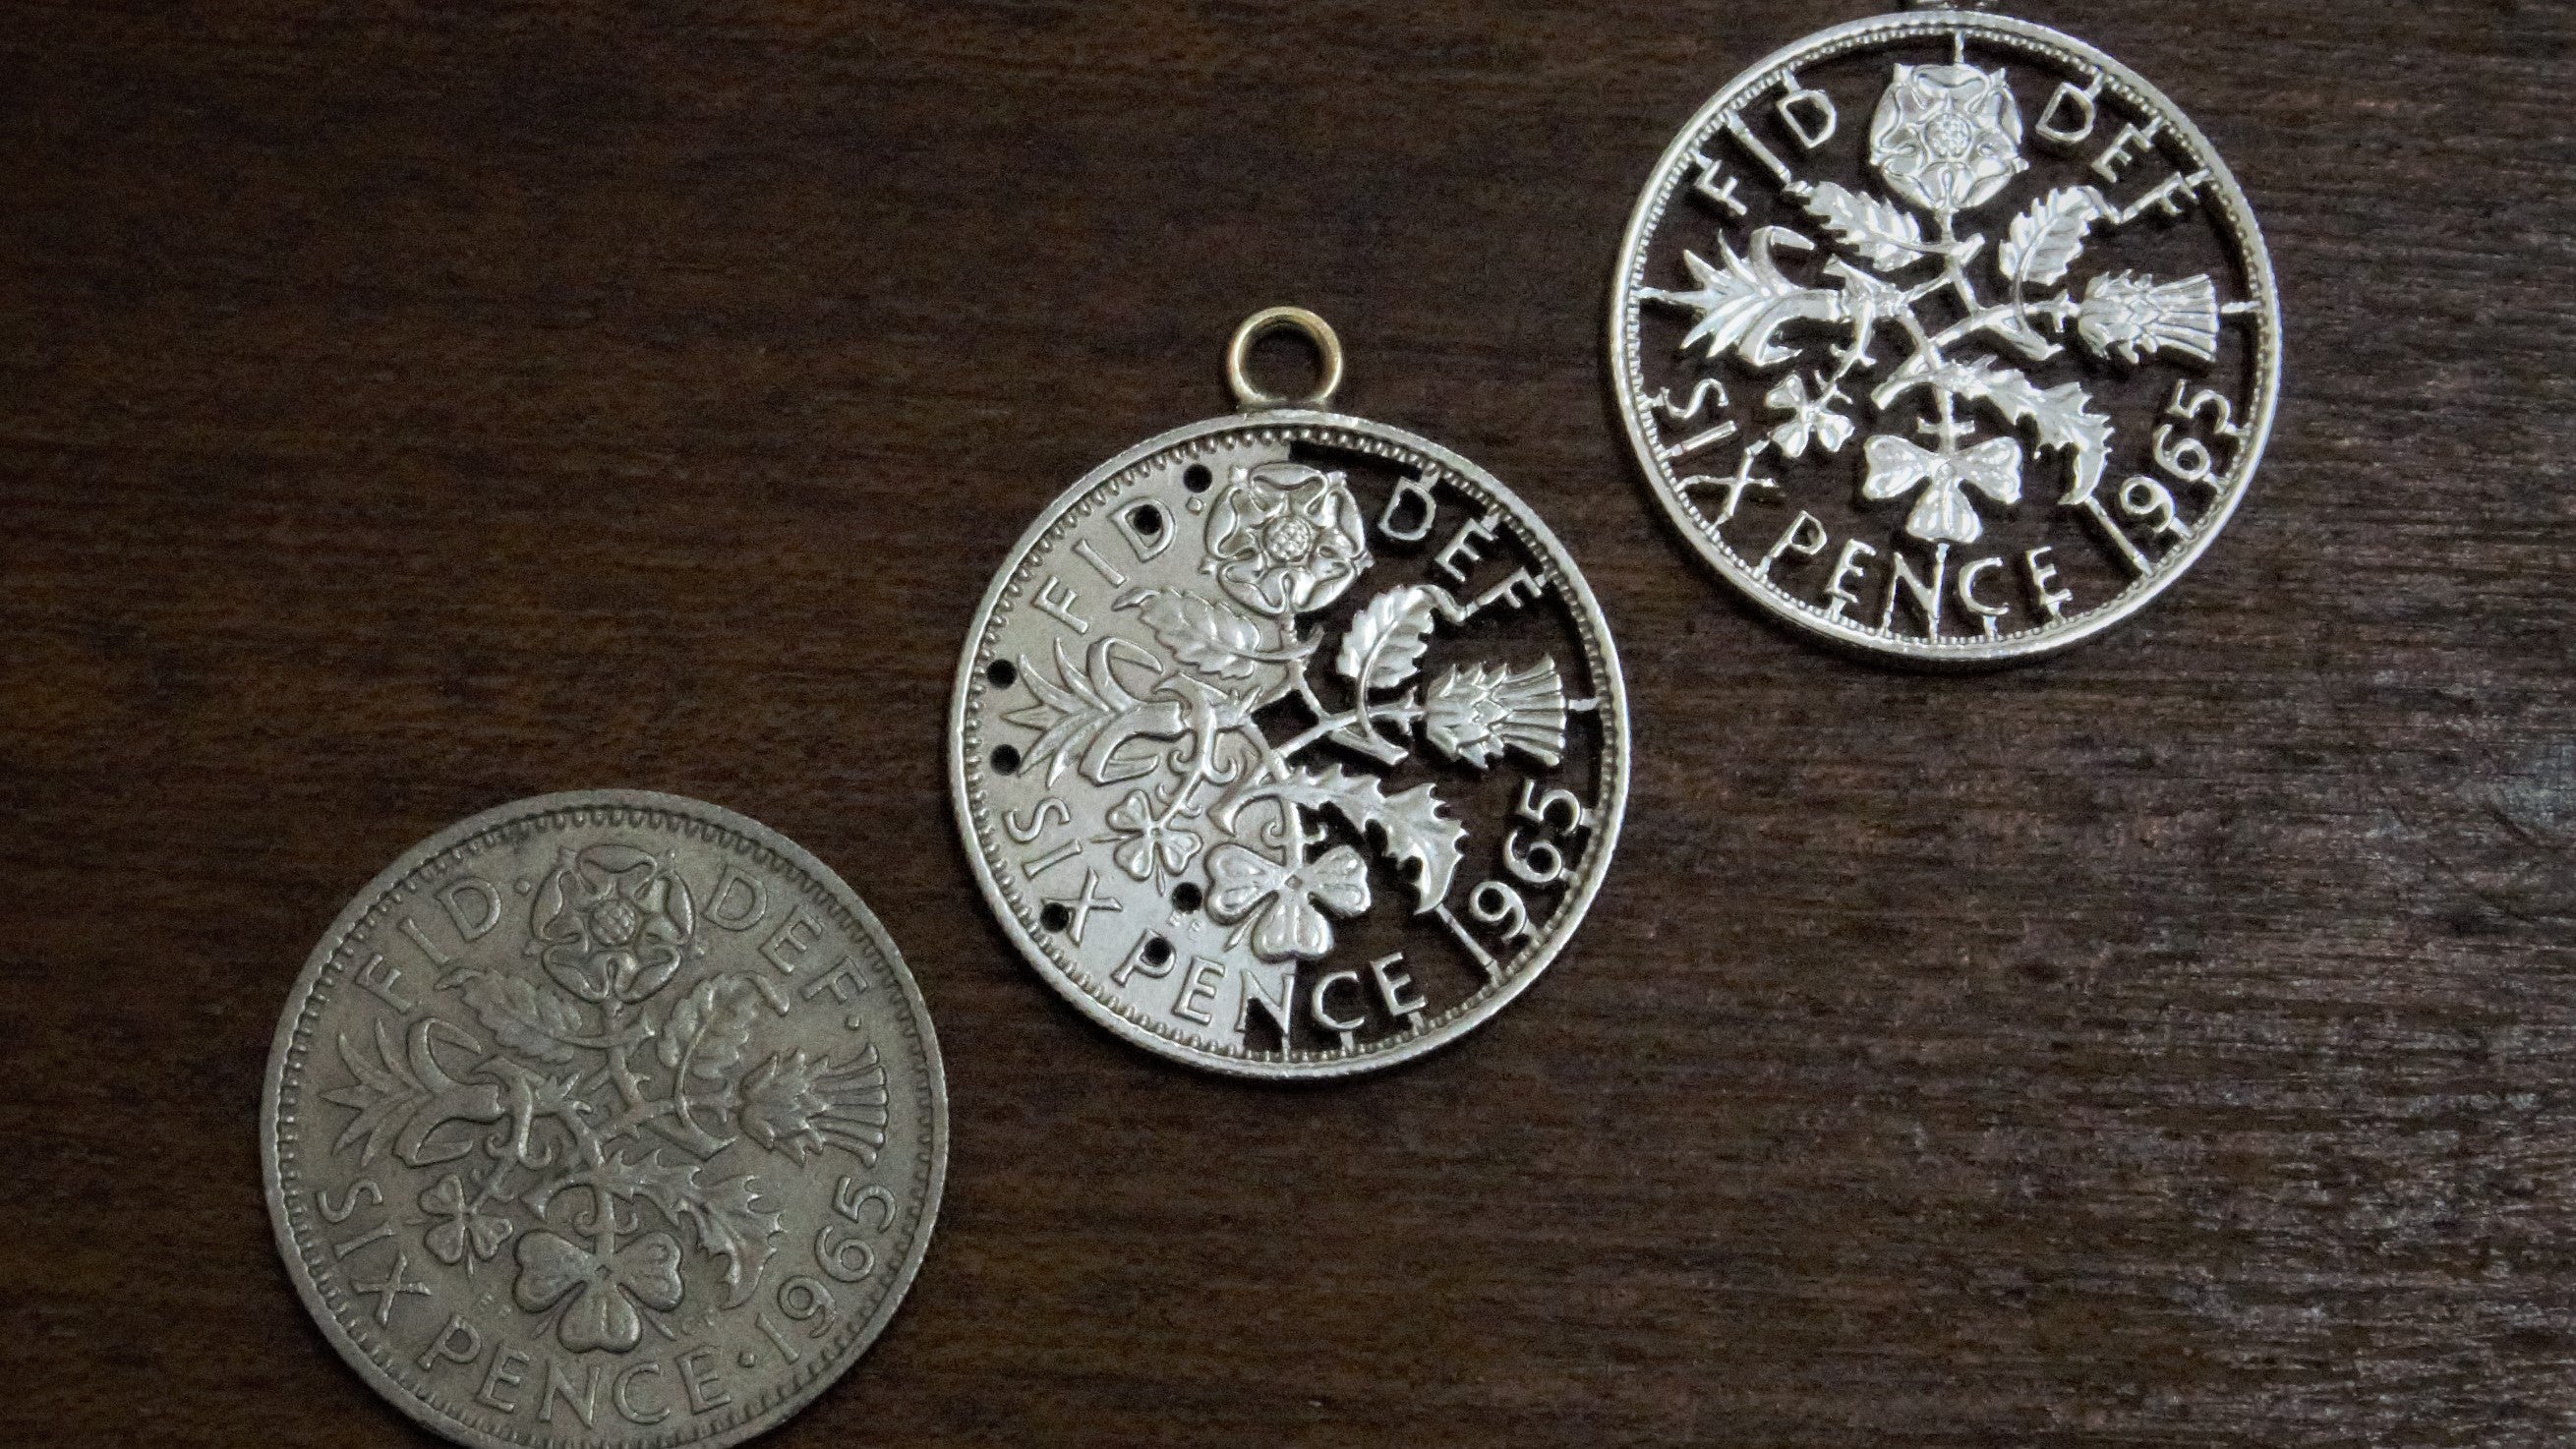 Three coins at different stages of manufacture, being turned into bespoke bridal jewellery by Coin Design